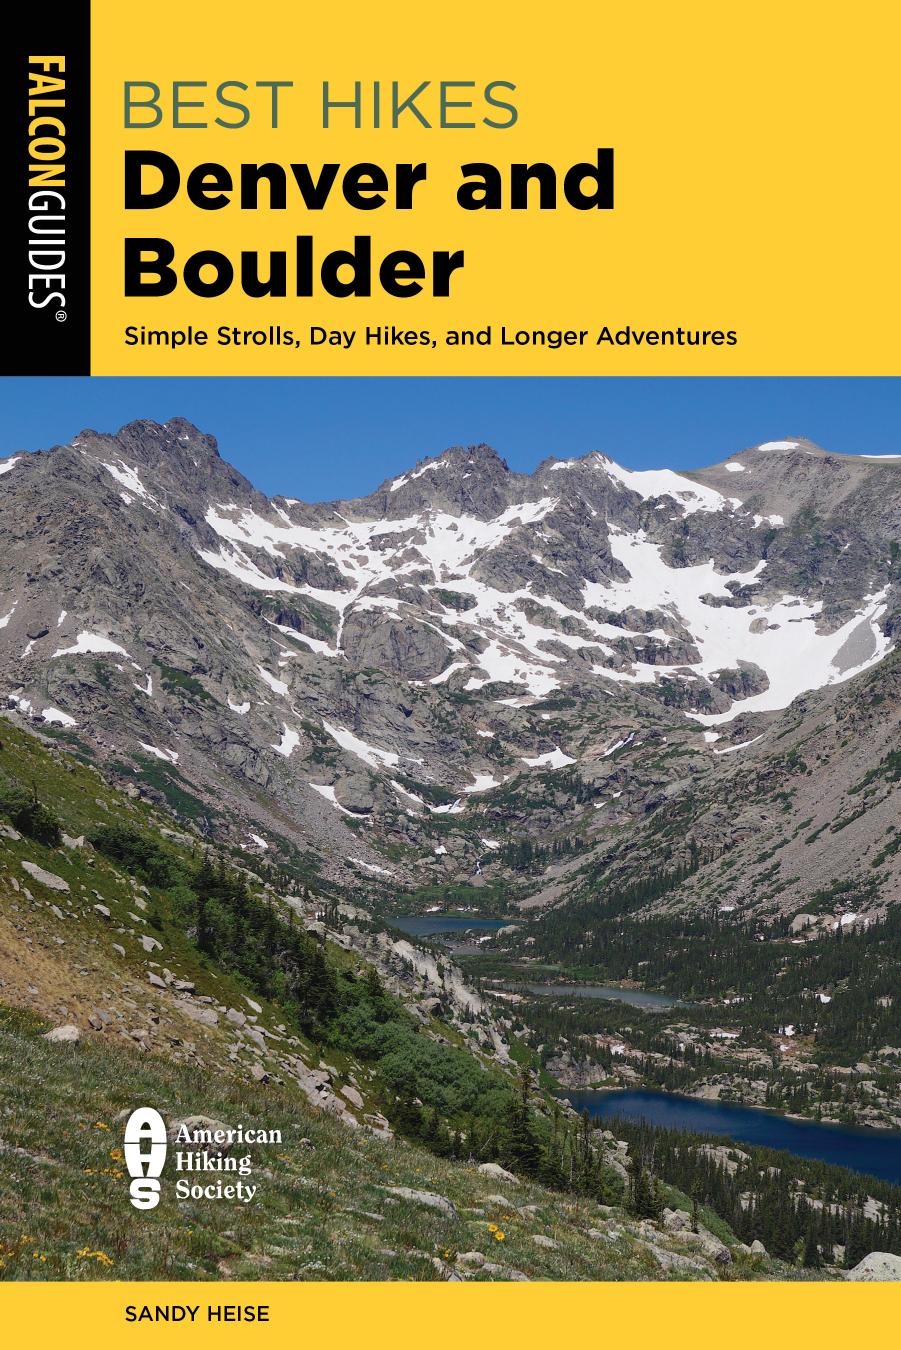 Best Hikes Denver and Boulder: Simple Strolls, Day Hikes, and Longer Adventures by Sandy Heise